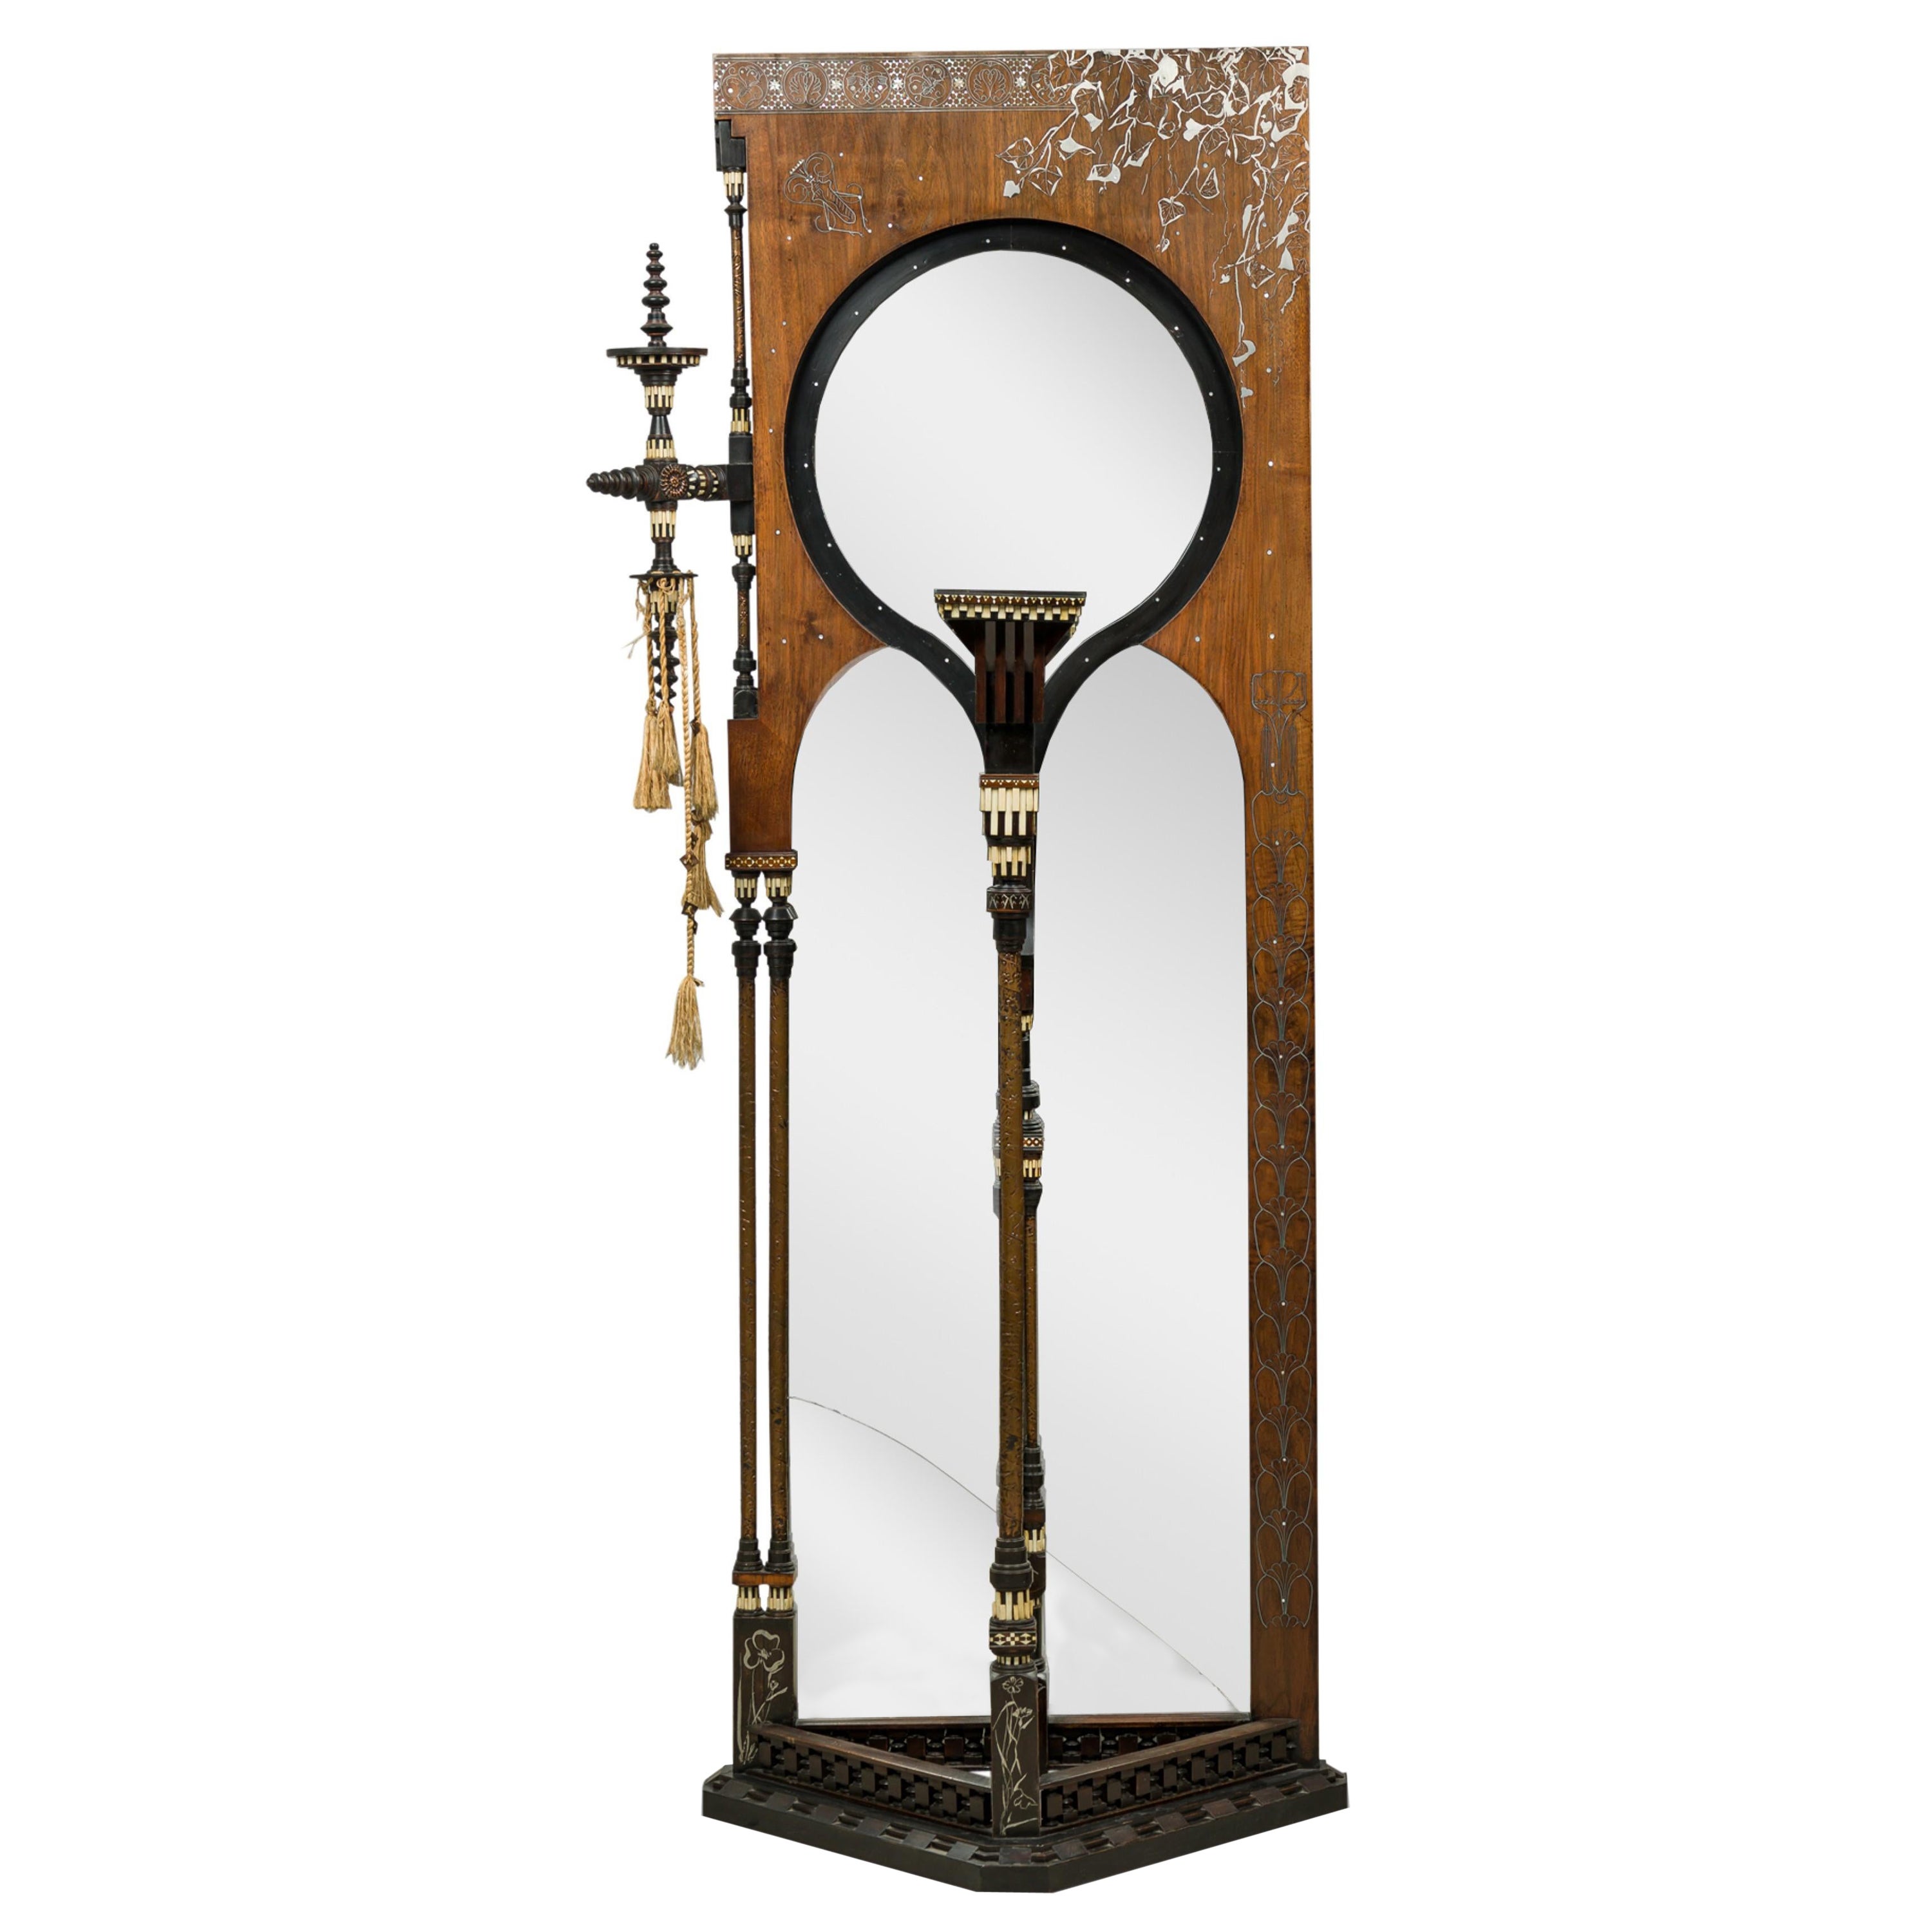 Carlo Bugatti Mirrored Hall/Hat Stand with Mother of Pearl, Silver, & Bone Inlay For Sale